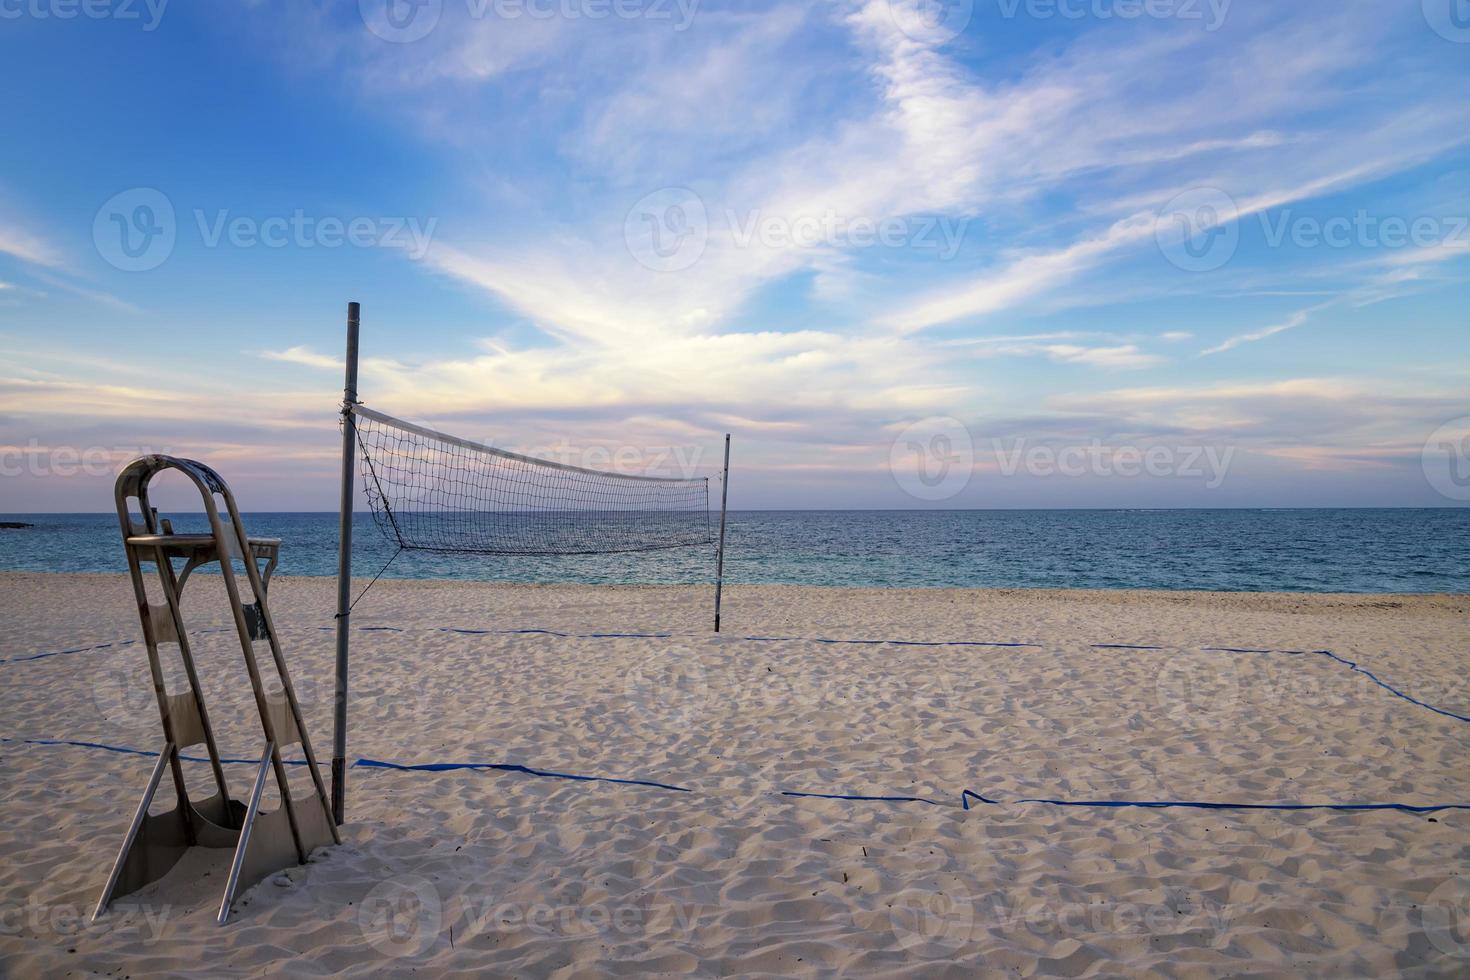 A beach volleyball net on the sandy tropical beach at the sunset or sunrise photo